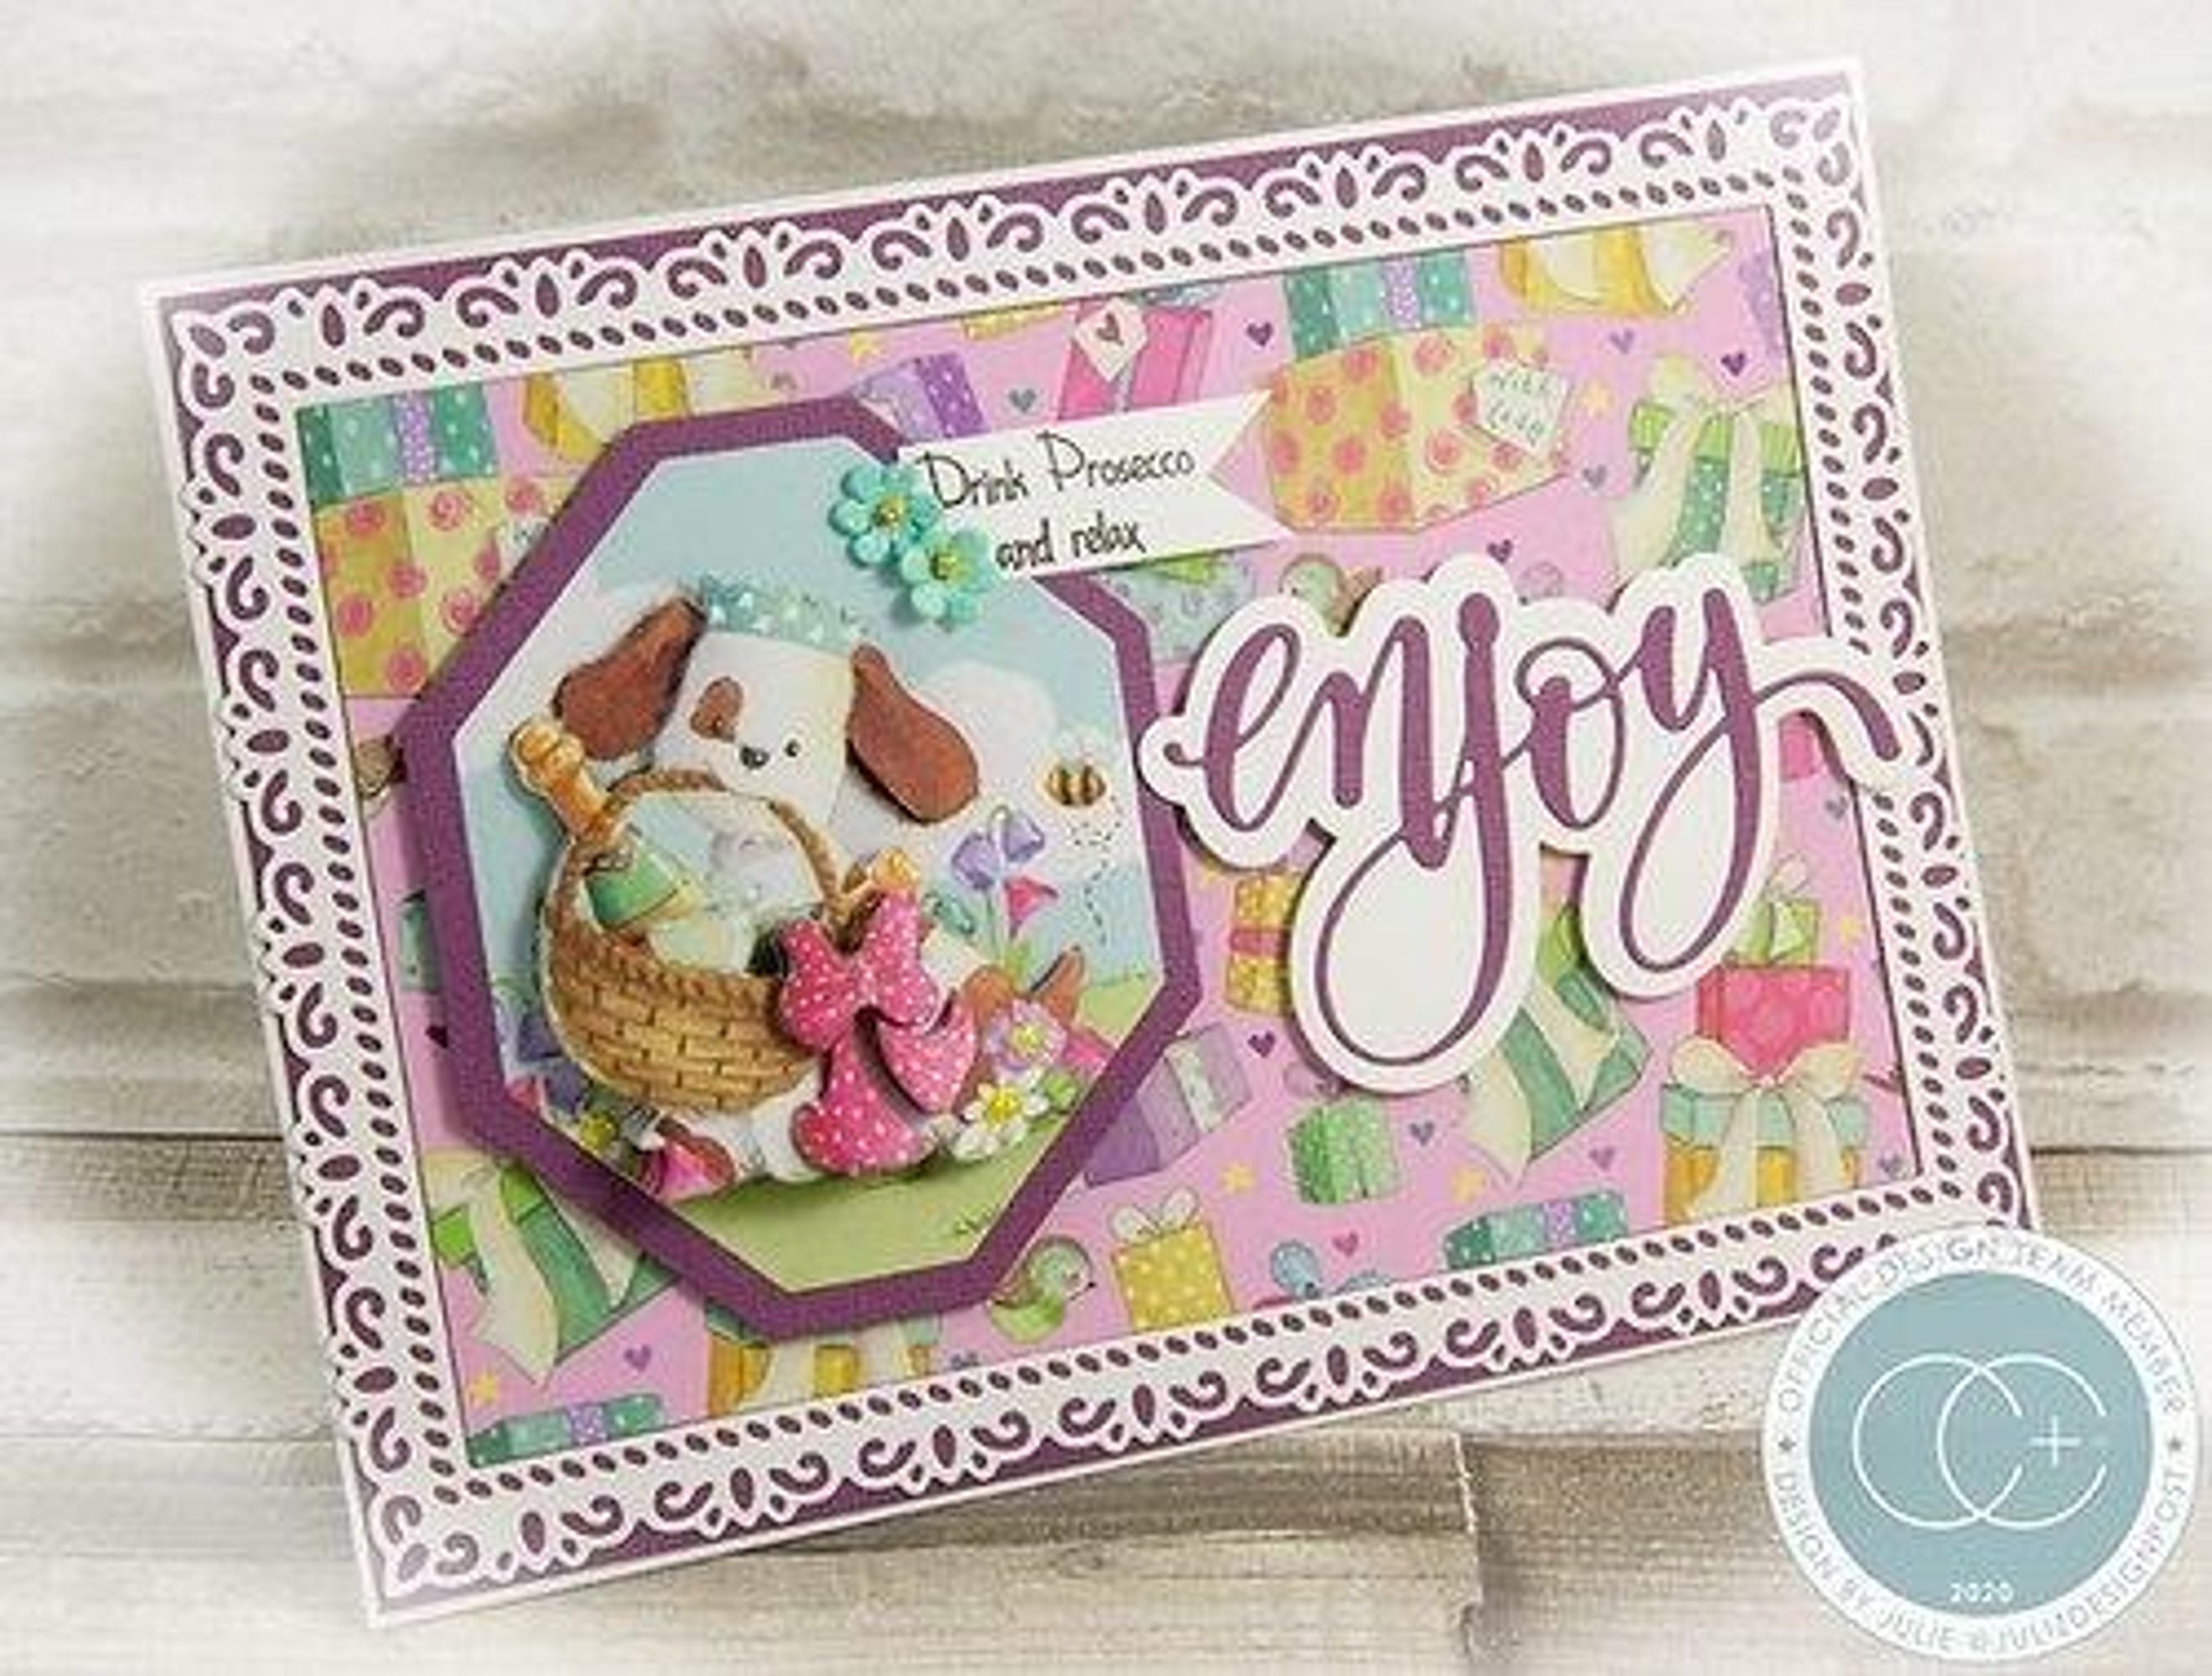 The Gift of Giving 3D Decoupage